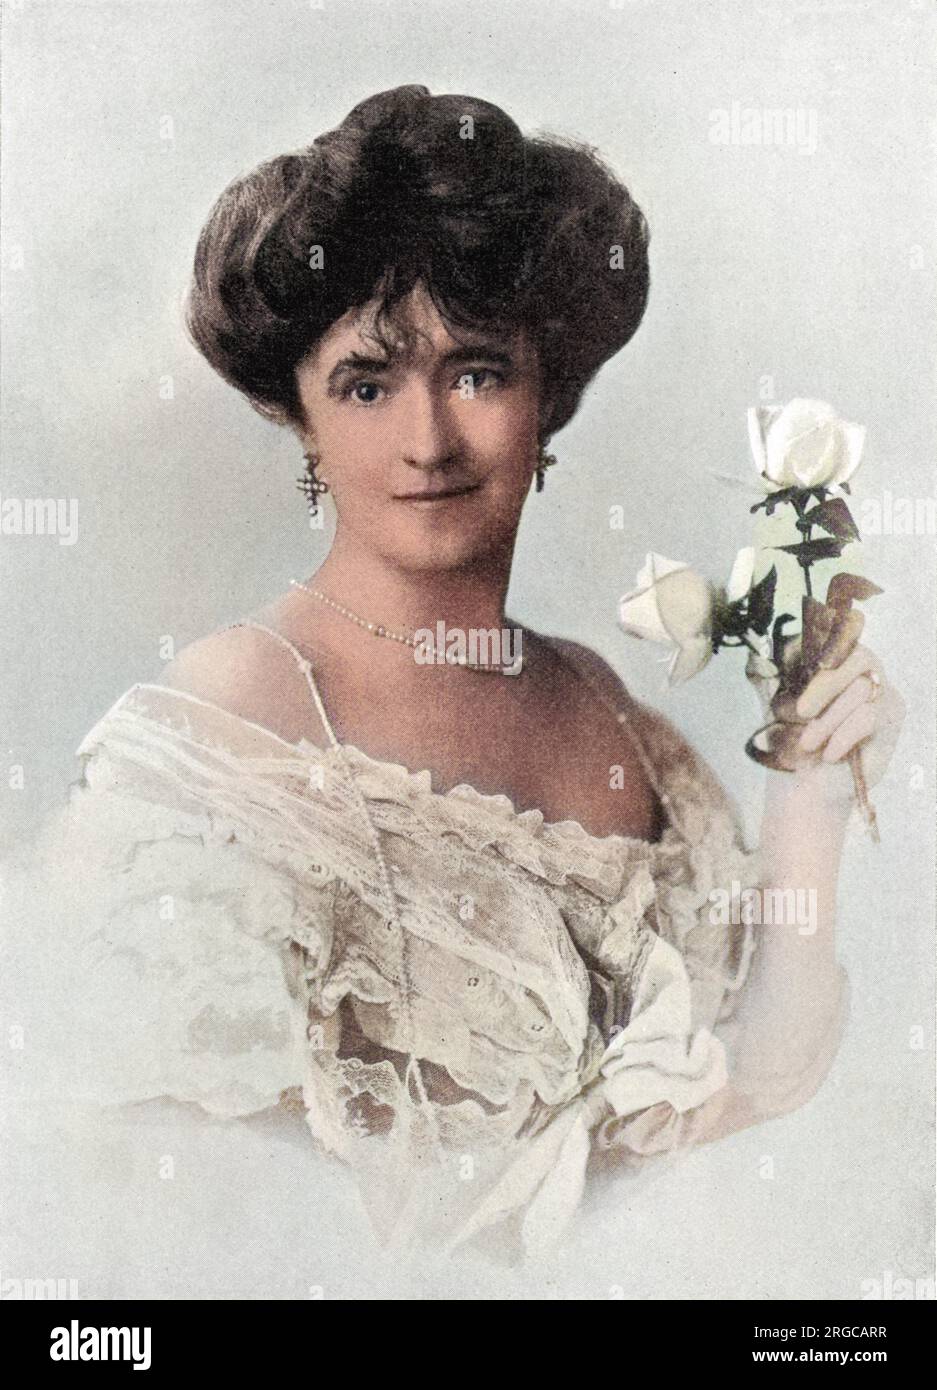 Lucy Christiana, Lady Duff Gordon, a leading fashion designer better known by her professional name, 'Lucile'. She was the proprietor of Lucile's, Hanover Square, famous for the 'emotional' gown. Sister of the writer, Elinor Glyn and wife of Sir Cosmo Duff Gordon. Stock Photo